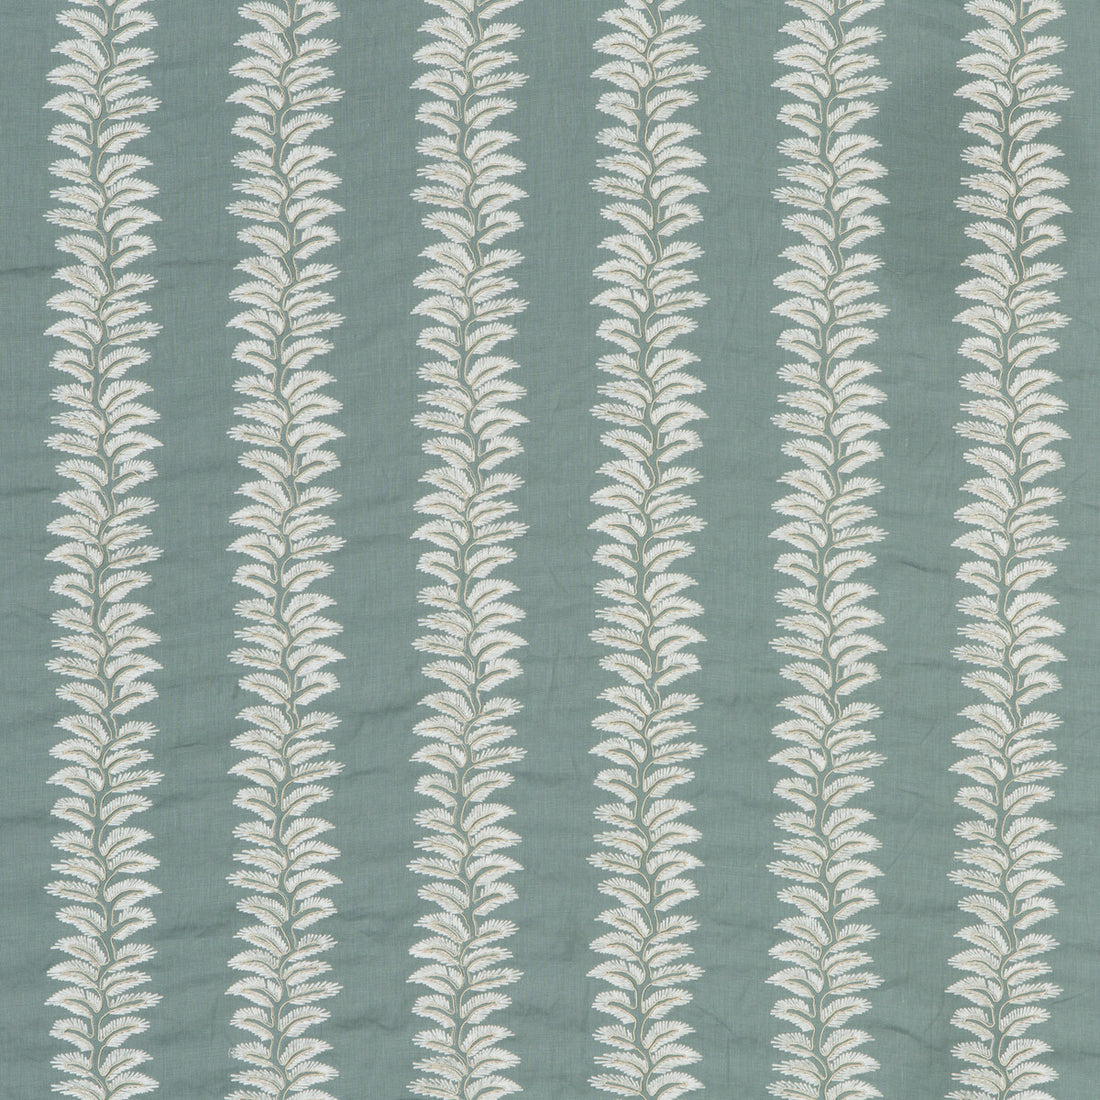 Bradbourne fabric in teal color - pattern BF10533.615.0 - by G P &amp; J Baker in the Langdale collection